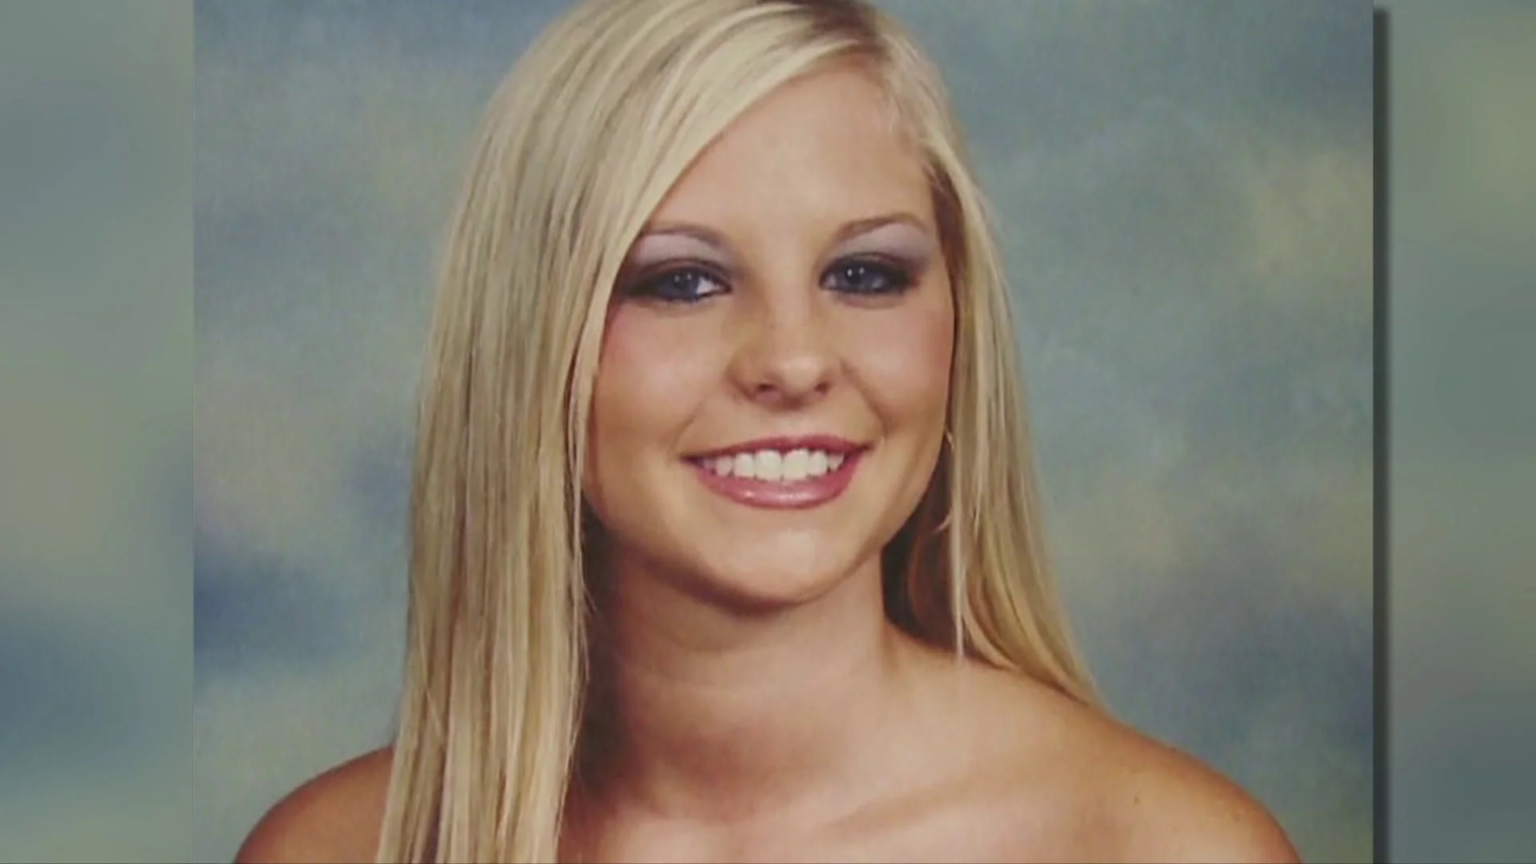 Who Killed Holly Bobo What Are The Facts Surrounding The Murder